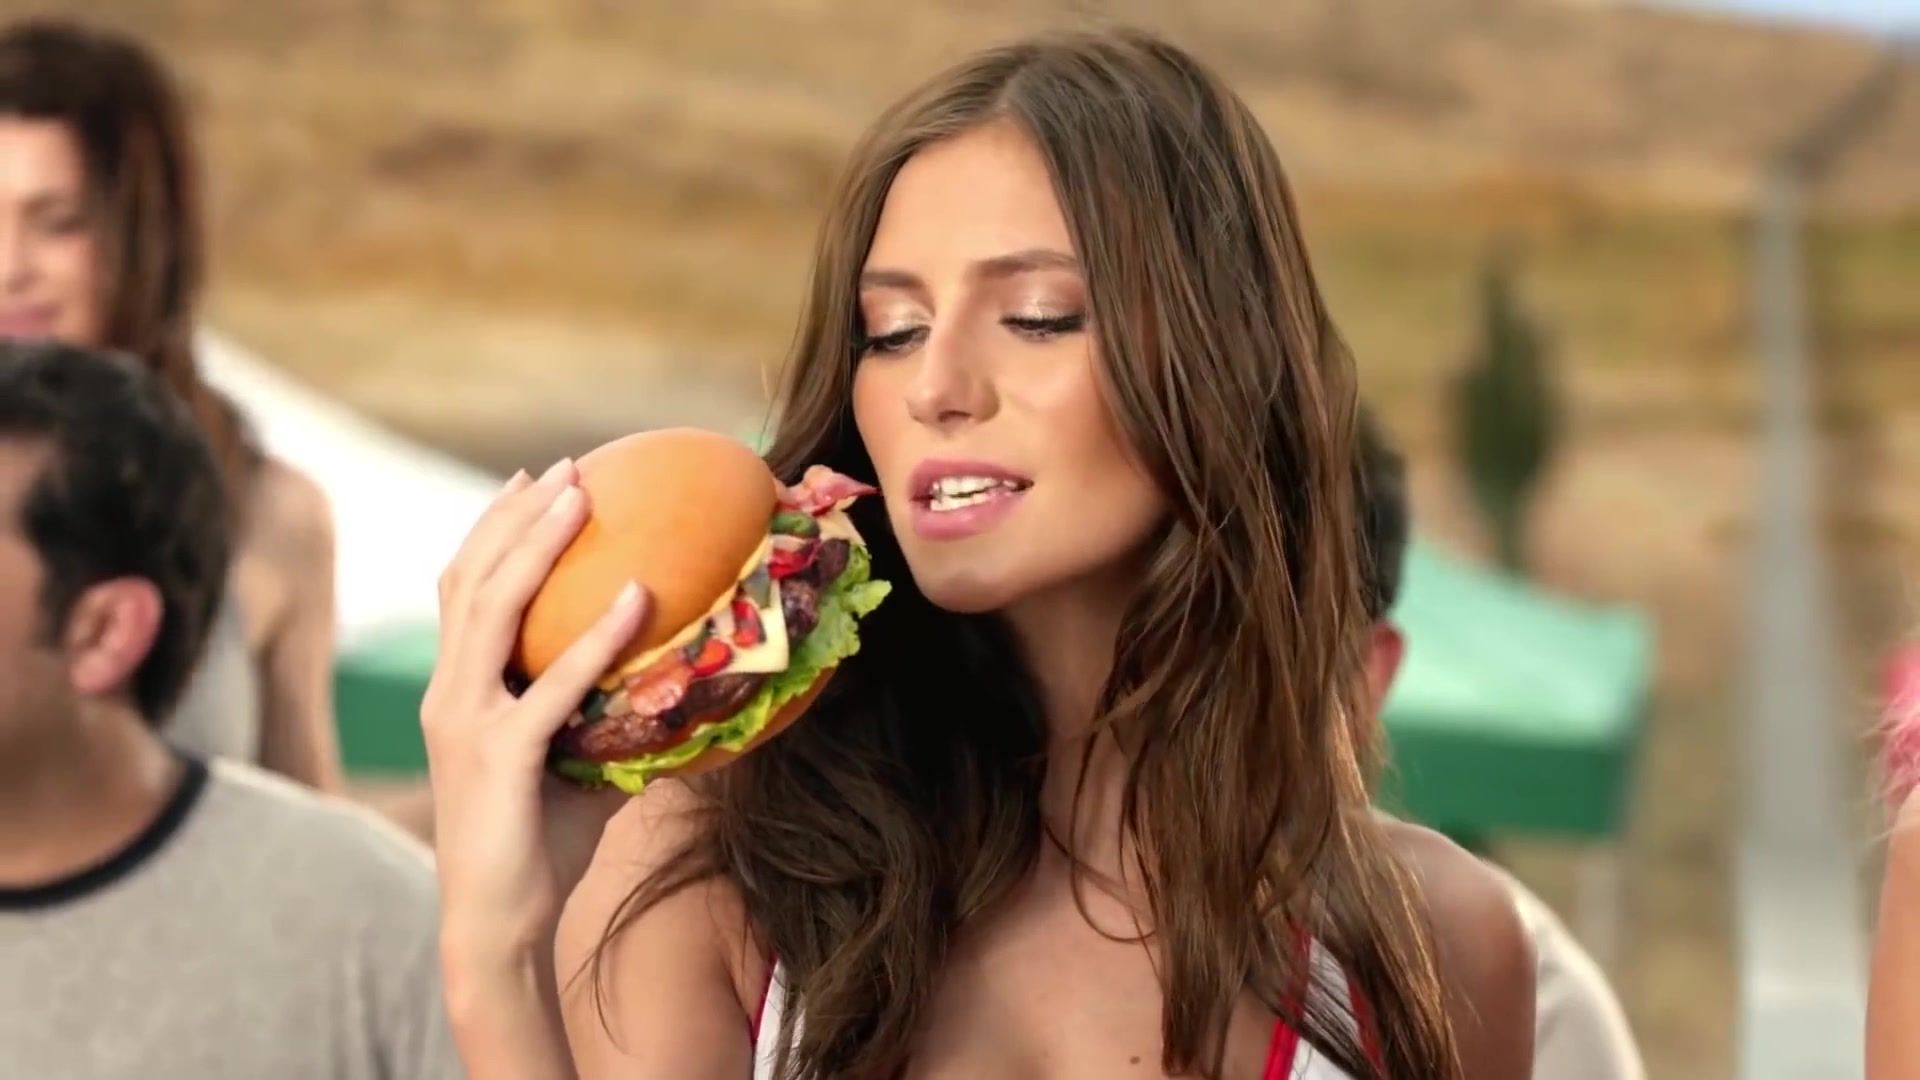 Jerkoff Sexiest Girls of Fast food Commercials - Charlotte McKinney Kate Upton Emily Rat. 18Asianz